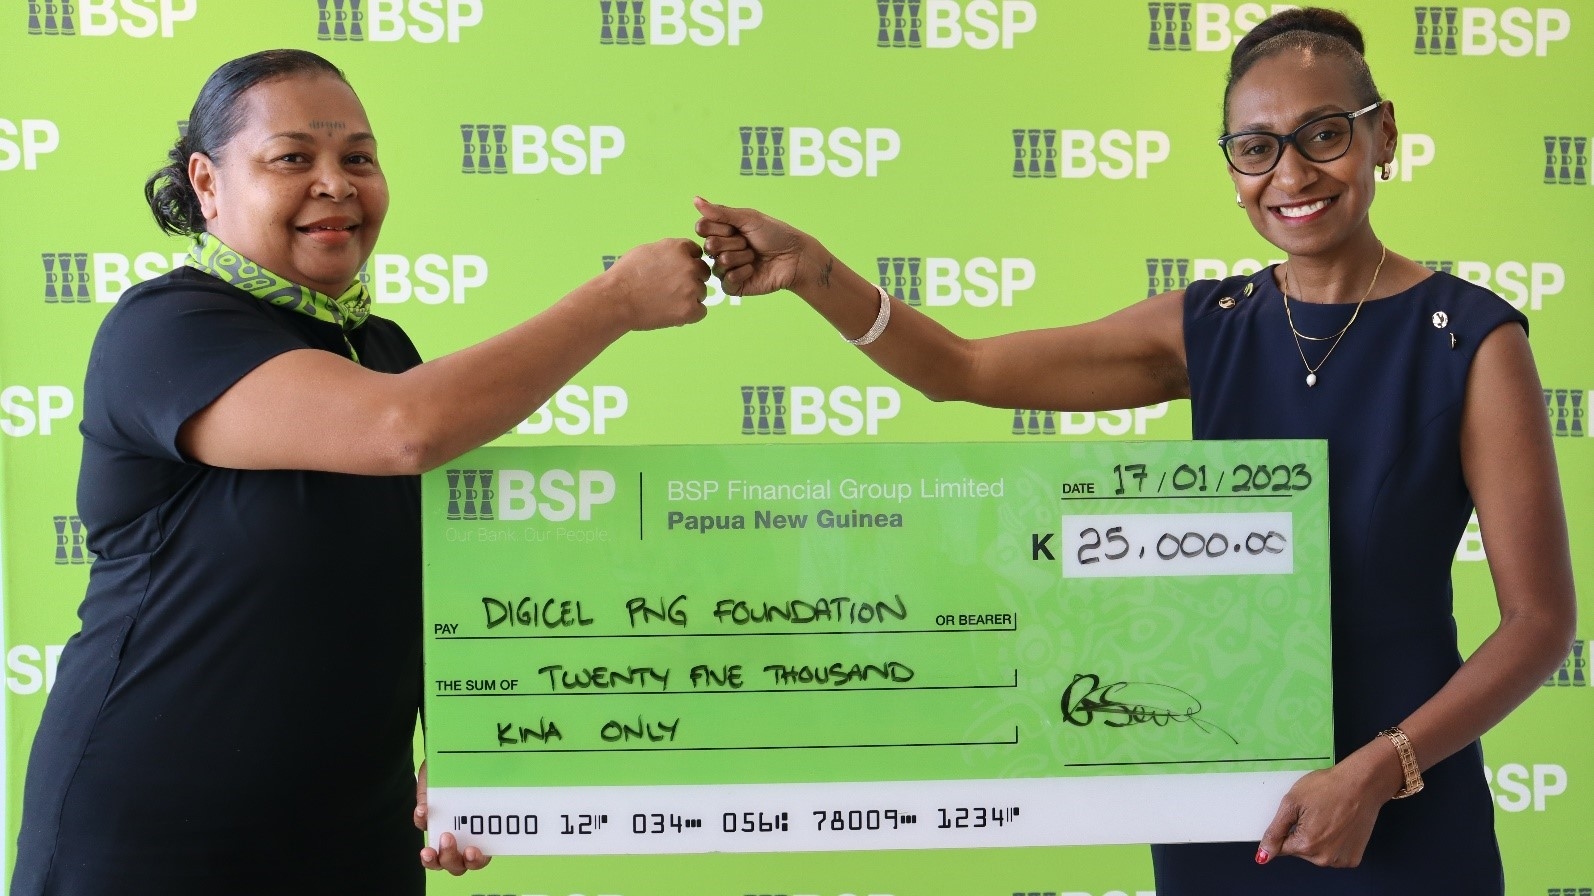 (L-R): BSP Head of Marketing and Public Relations Gorethy Semi presented a cheque of K25,000 to Digicel PNG Foundation CEO Serena Sasingian for the Men Of Honour Southern Region Category Awards.